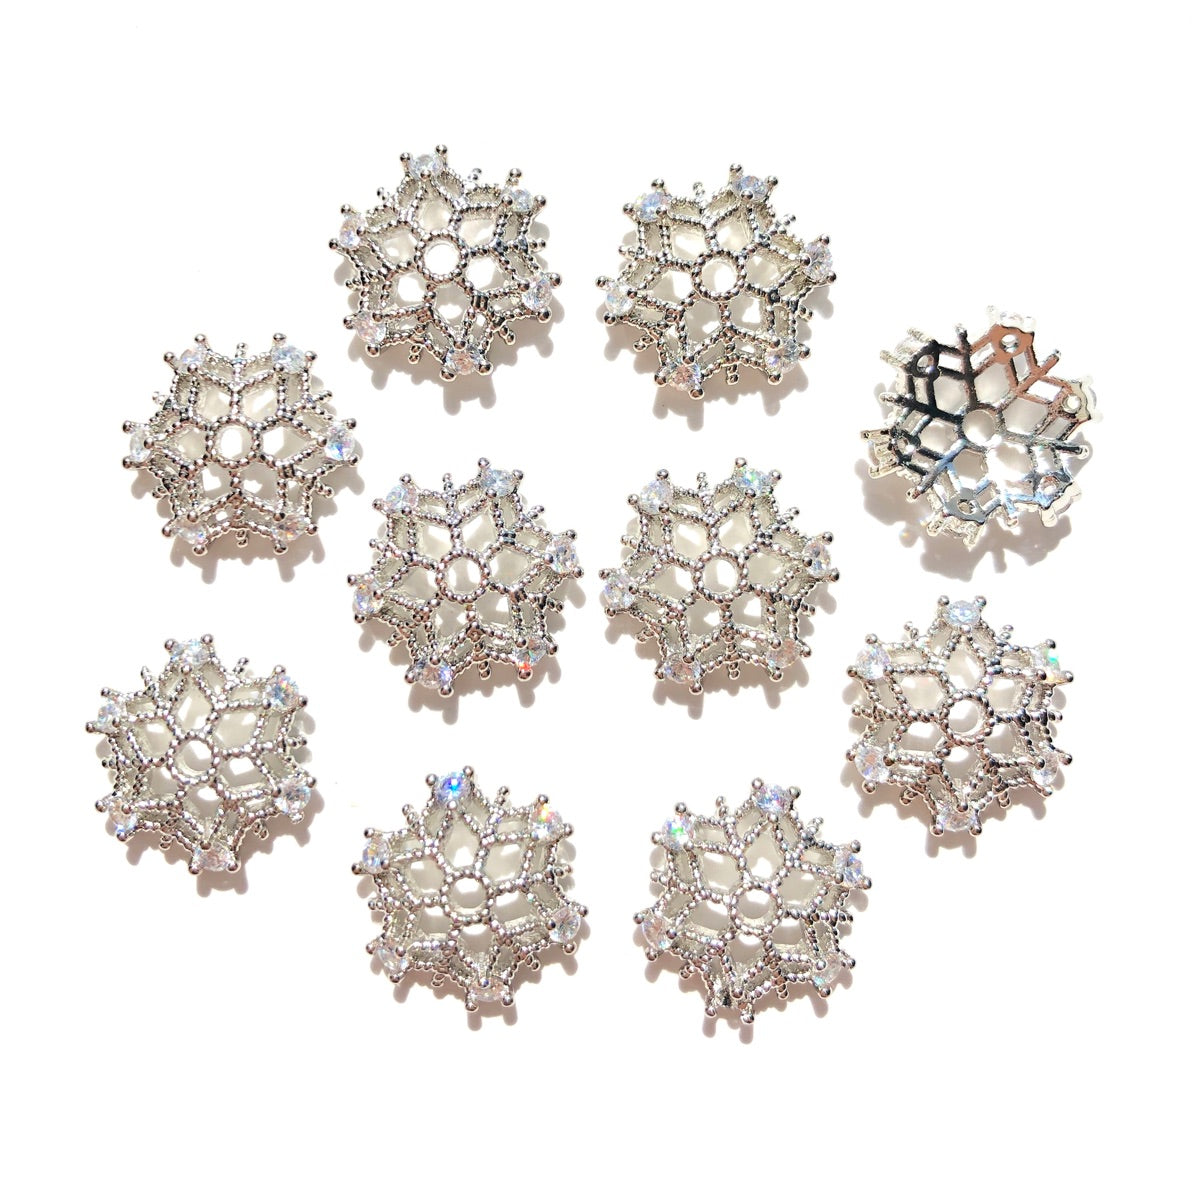 20-50pcs/lot 13.7mm CZ Paved Hollow Snowflake Beads Caps Spacers Silver CZ Paved Spacers Beads Caps New Spacers Arrivals Wholesale Charms Beads Beyond